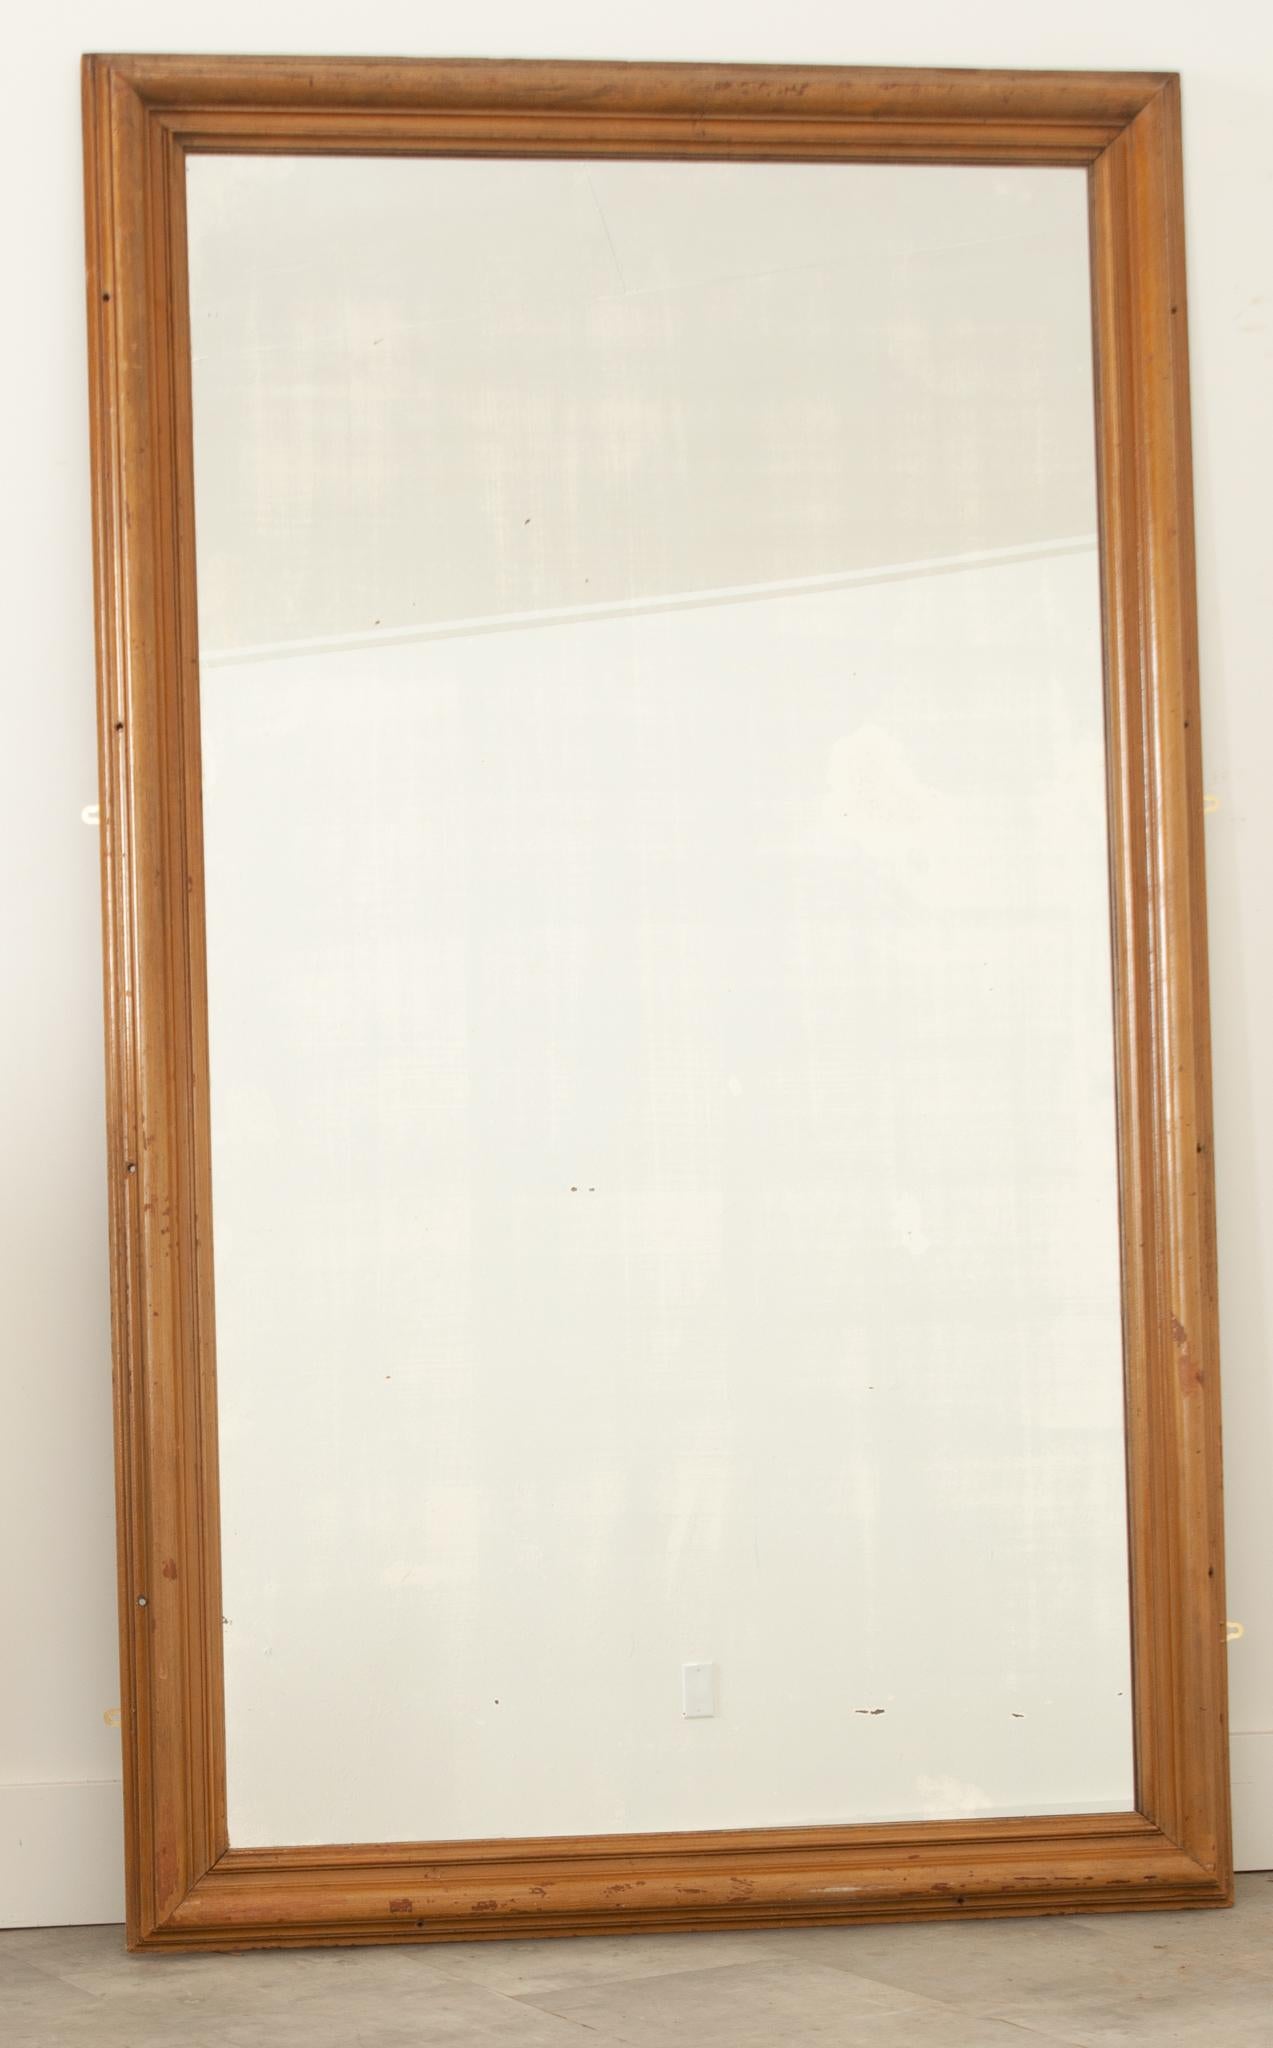 A massive mirror supported by a molded wood frame with a worn finish. Small, uniform holes found on the frame designate where it was screwed into a wall at one time for support. The original mercury mirror plate shows very minimal signs of wear or